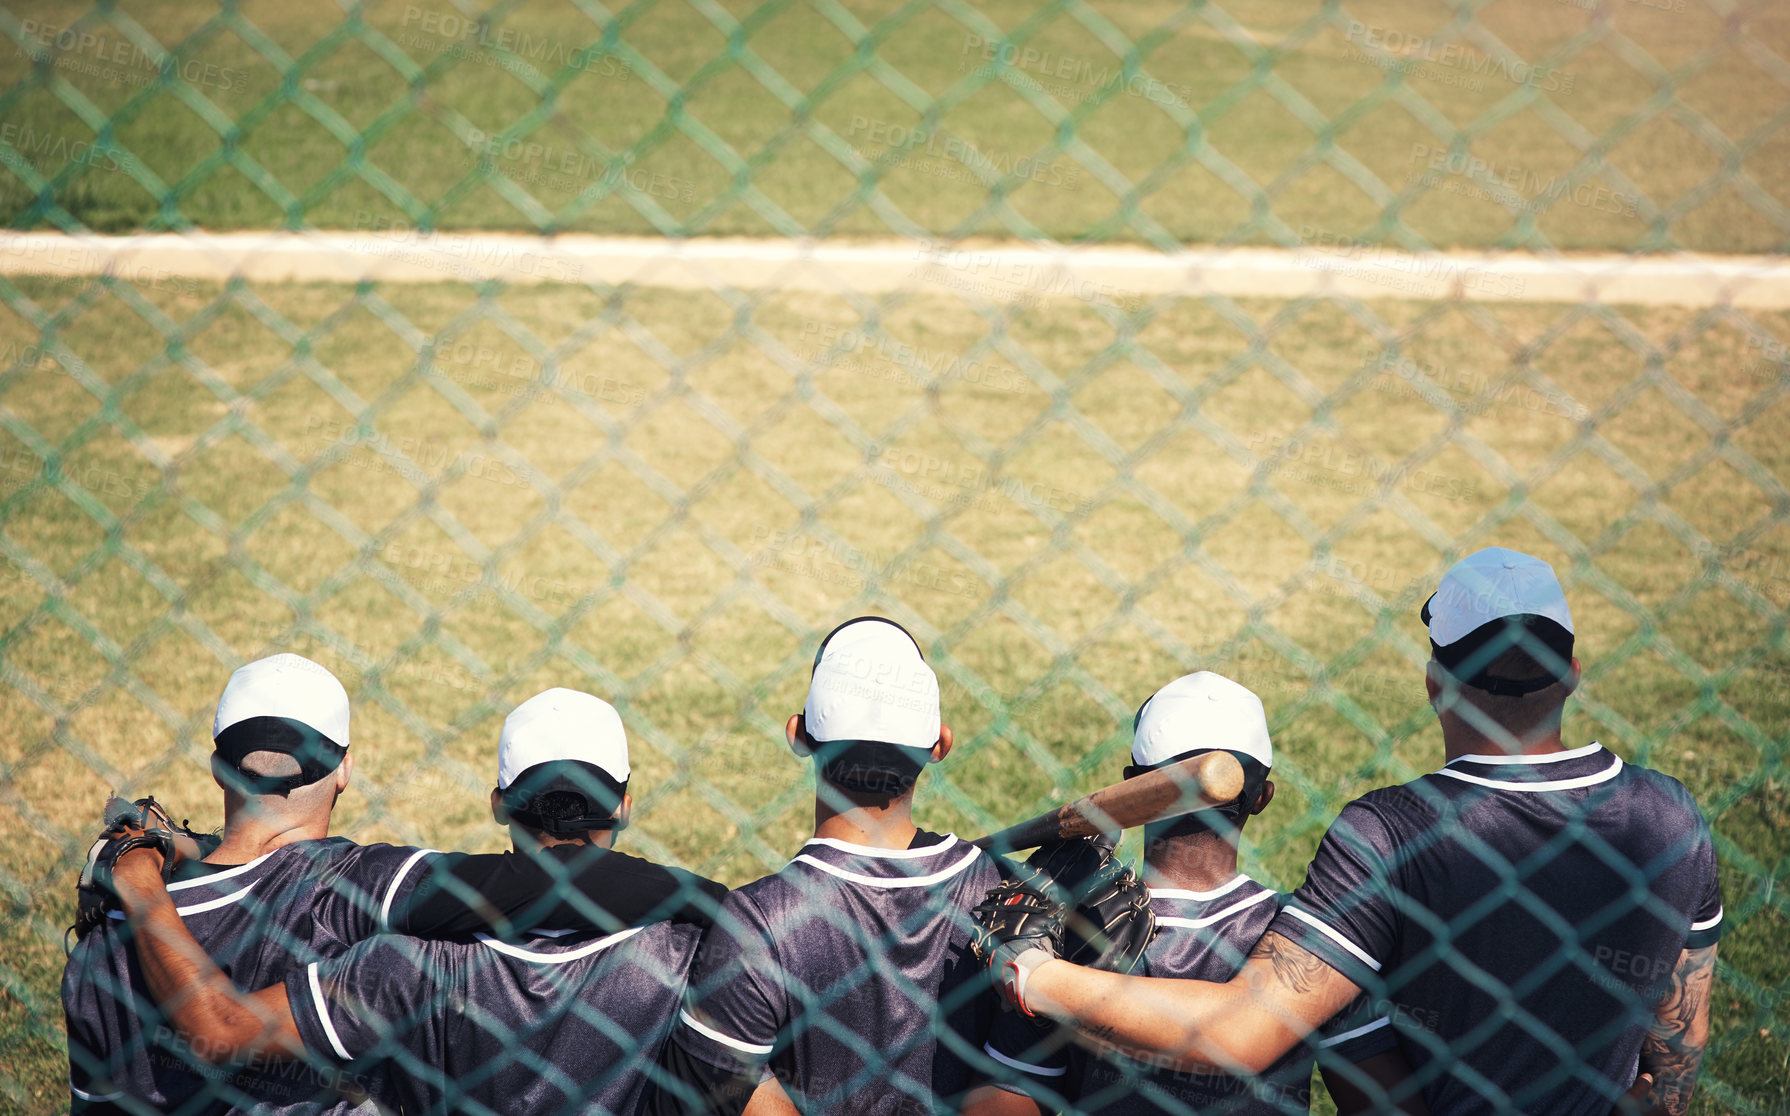 Buy stock photo Rearview shot of a group of young men standing together in solidarity at a baseball game